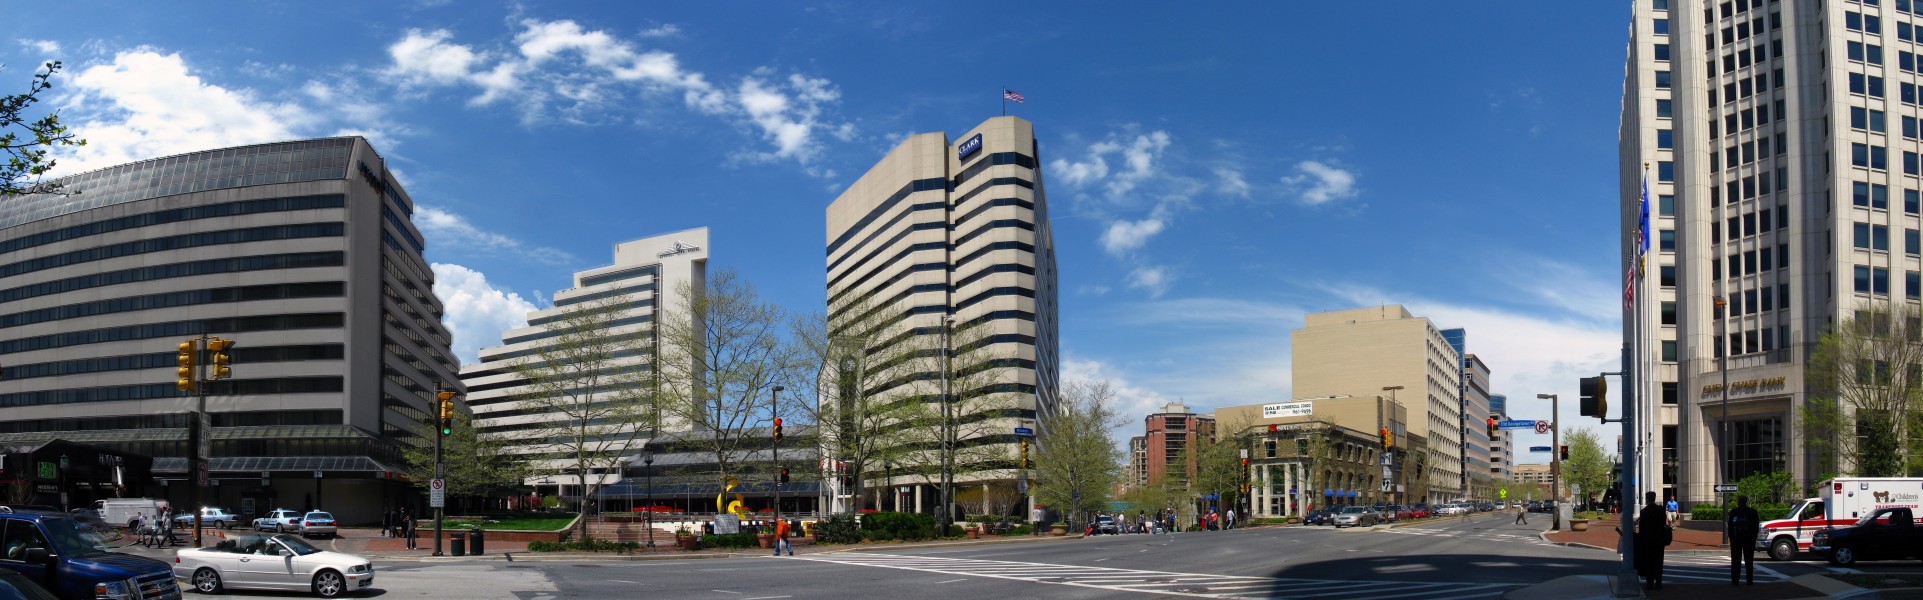 Intersection in Bethesda, Maryland